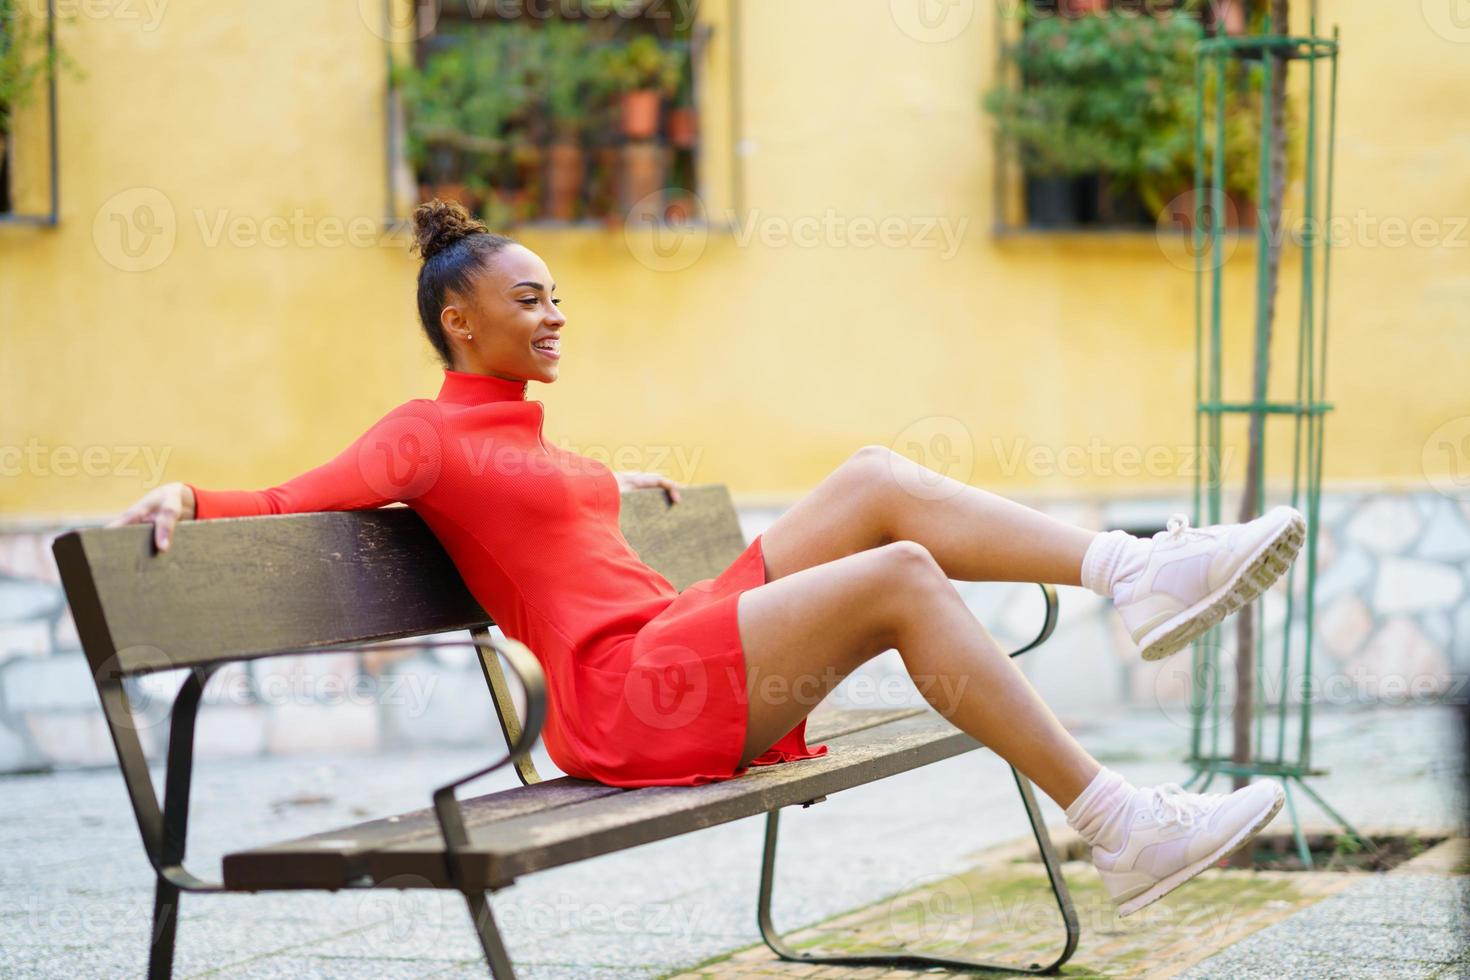 https://static.vecteezy.com/system/resources/previews/005/886/542/non_2x/happy-mixed-woman-moving-her-legs-in-joy-sitting-on-a-bench-in-the-street-photo.jpg